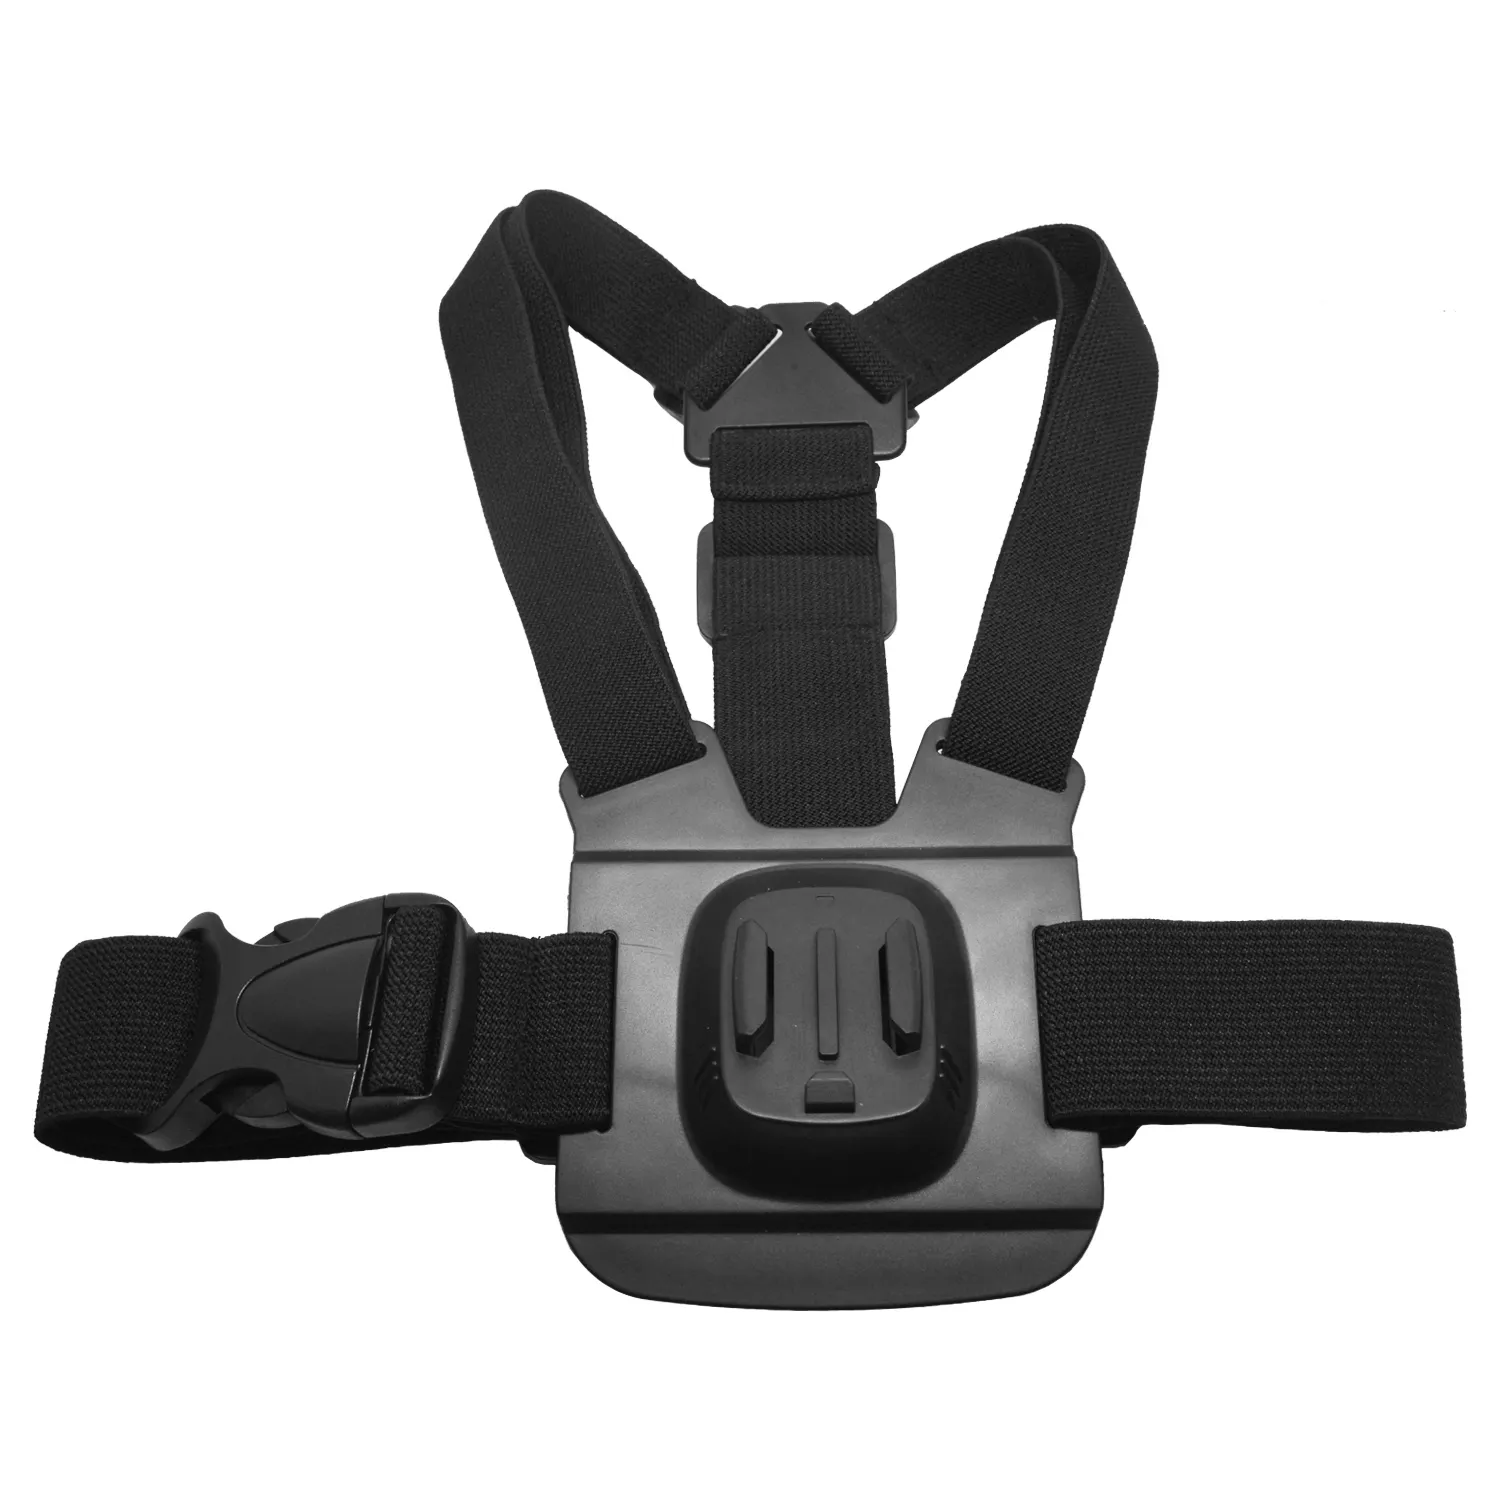 Action Camera Accessories Elastic Adjustable Chest Chesty Strap Harness Belt Mount For GoPro Hero SJ Cam Xiao mi Xiao yi